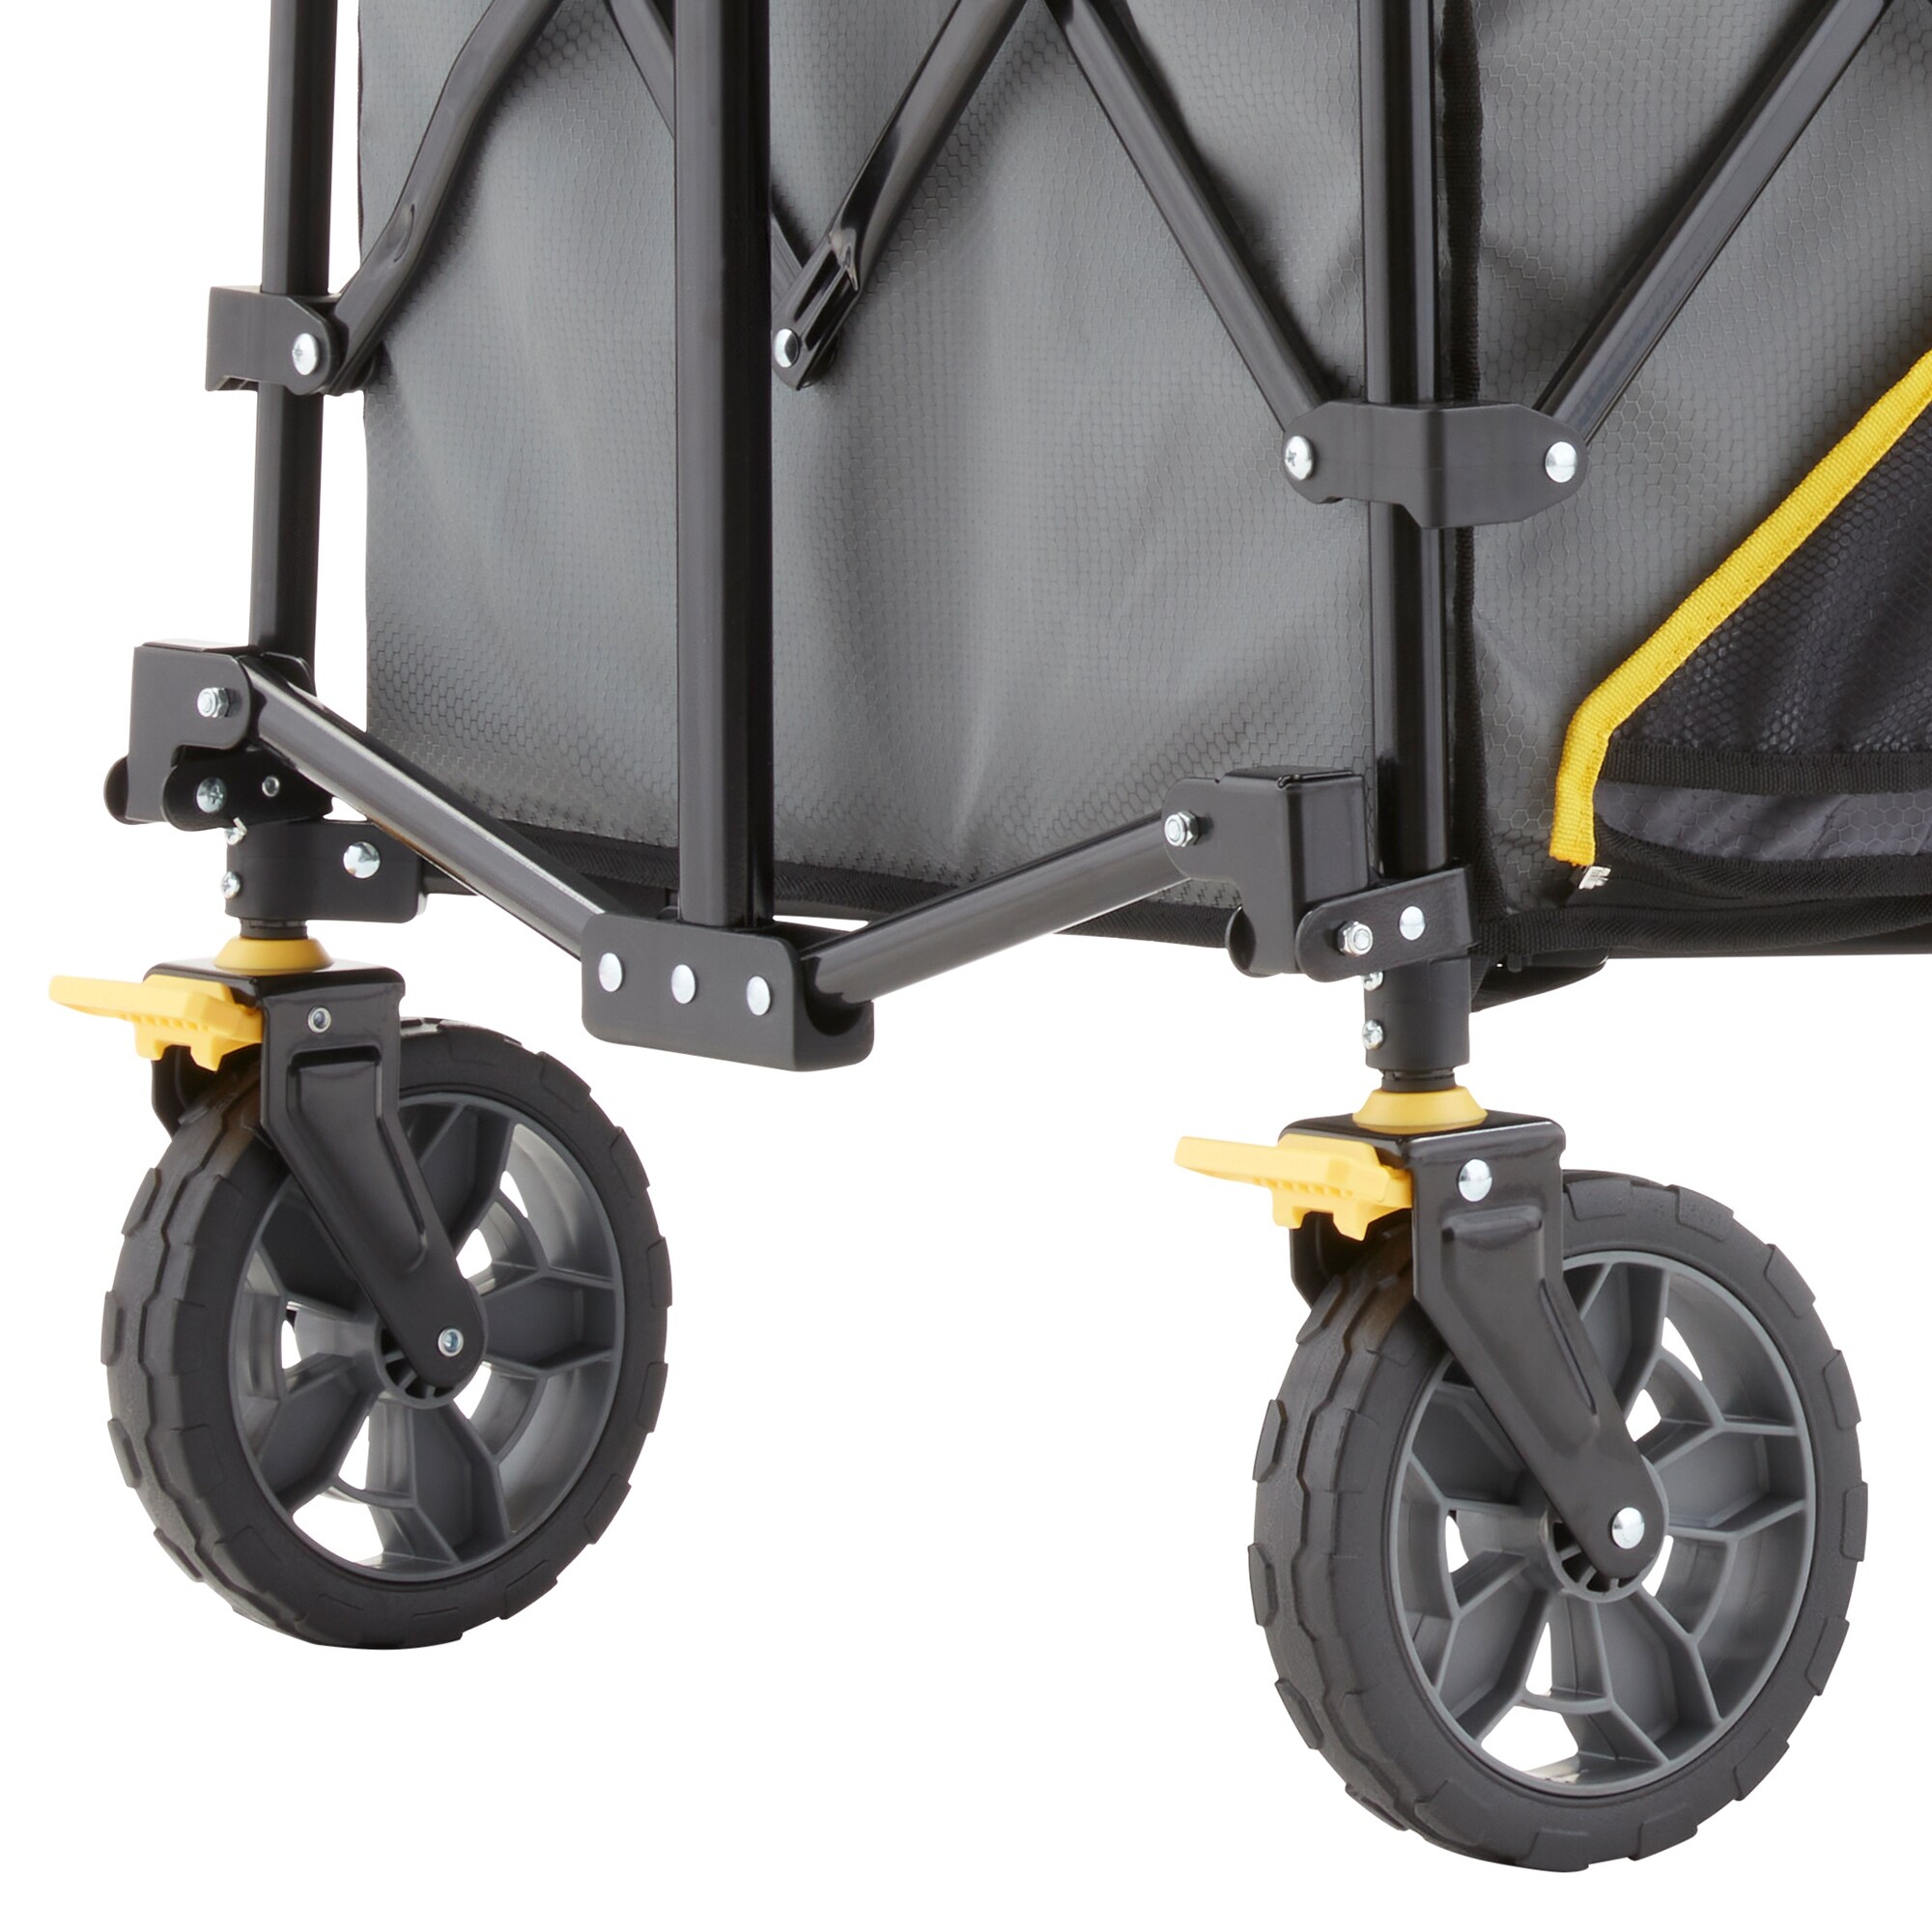 https://ak1.ostkcdn.com/images/products/is/images/direct/35d587fed140259bbc57766c087df811d46a9309/Gorilla-Carts-7-Cubic-Feet-Foldable-Utility-Beach-Wagon-with-Oversized-Bed%2C-Gray.jpg